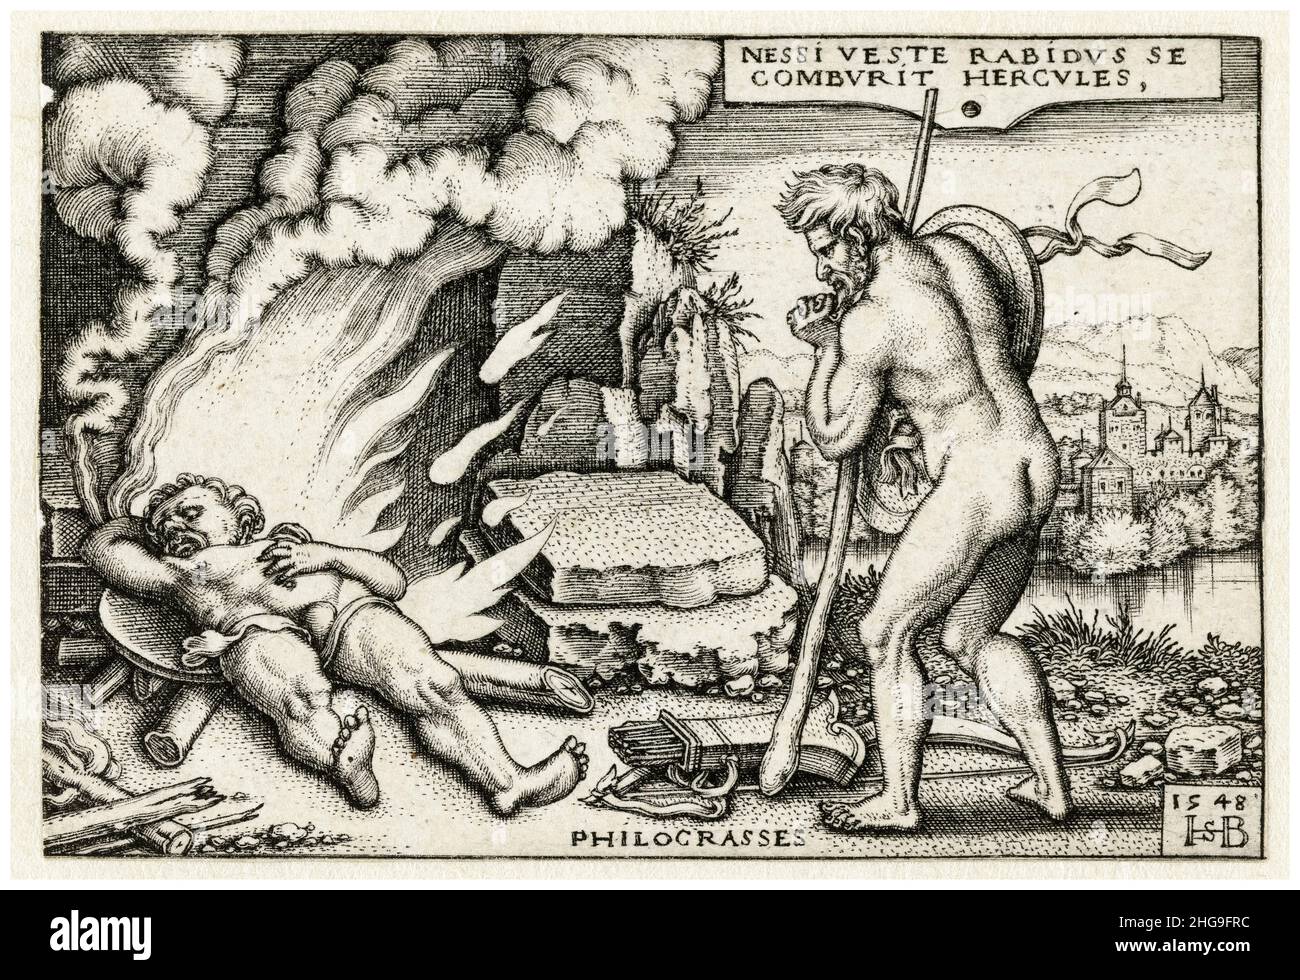 Death of Hercules at the stake and Philoctetes, engraving by Sebald Beham, 1548 Stock Photo